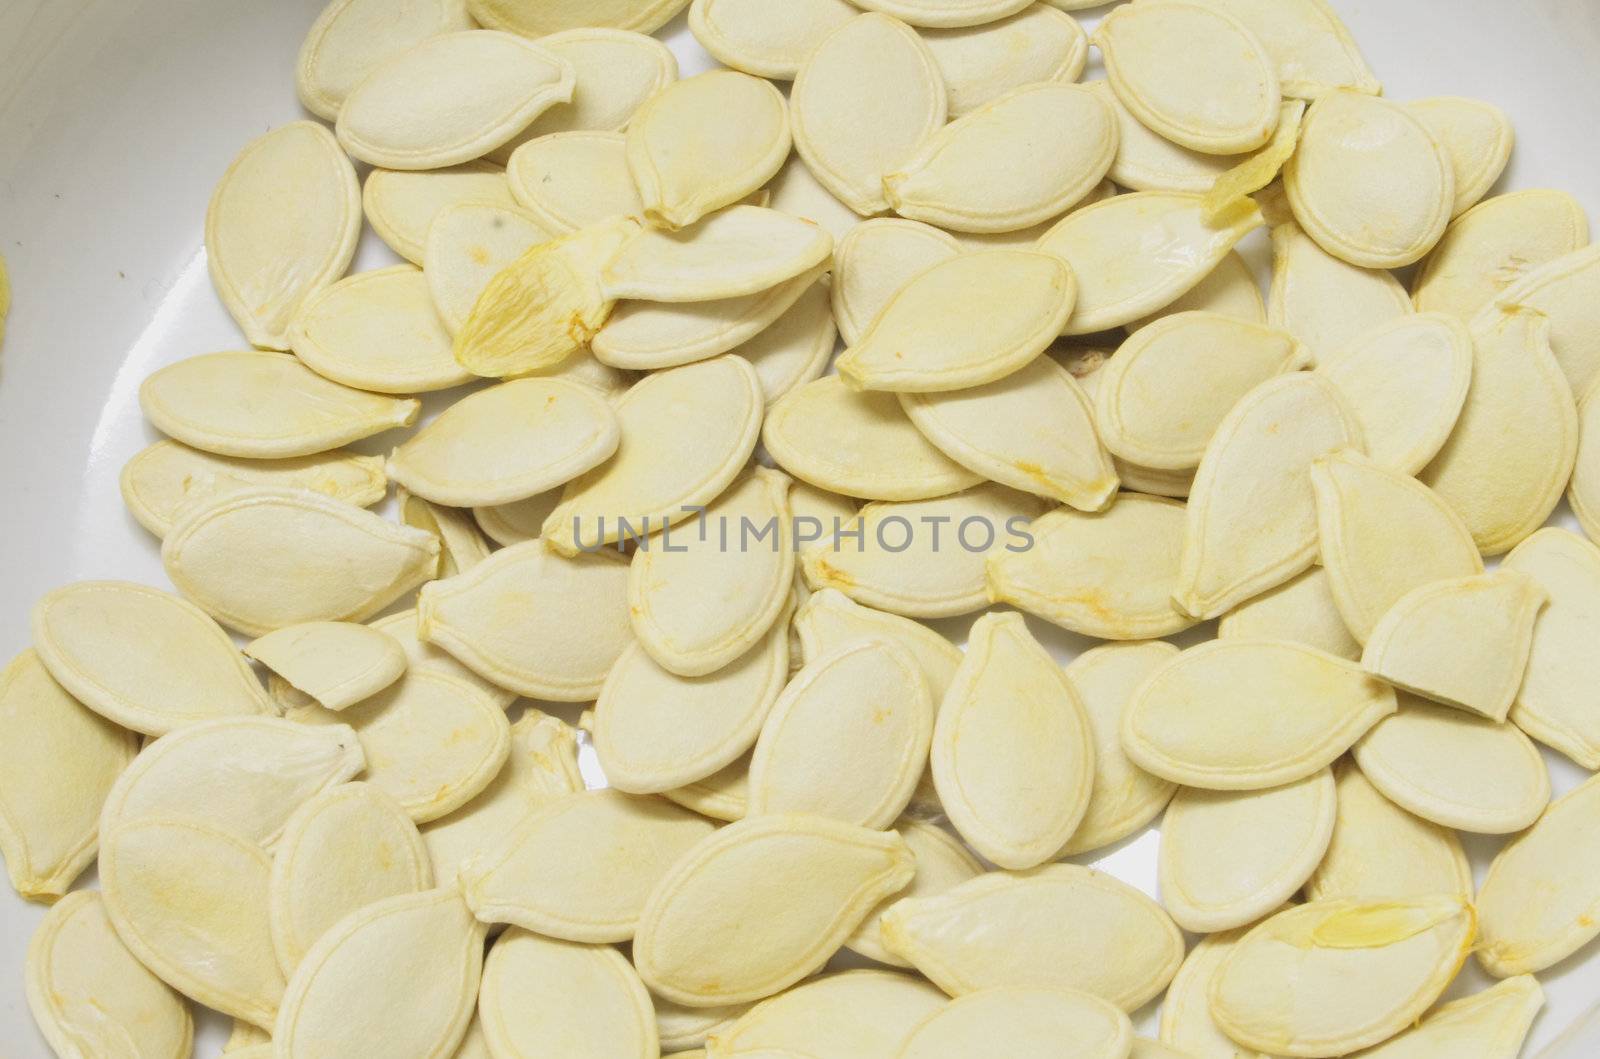 a whole lot of pumpkin seeds against a light background